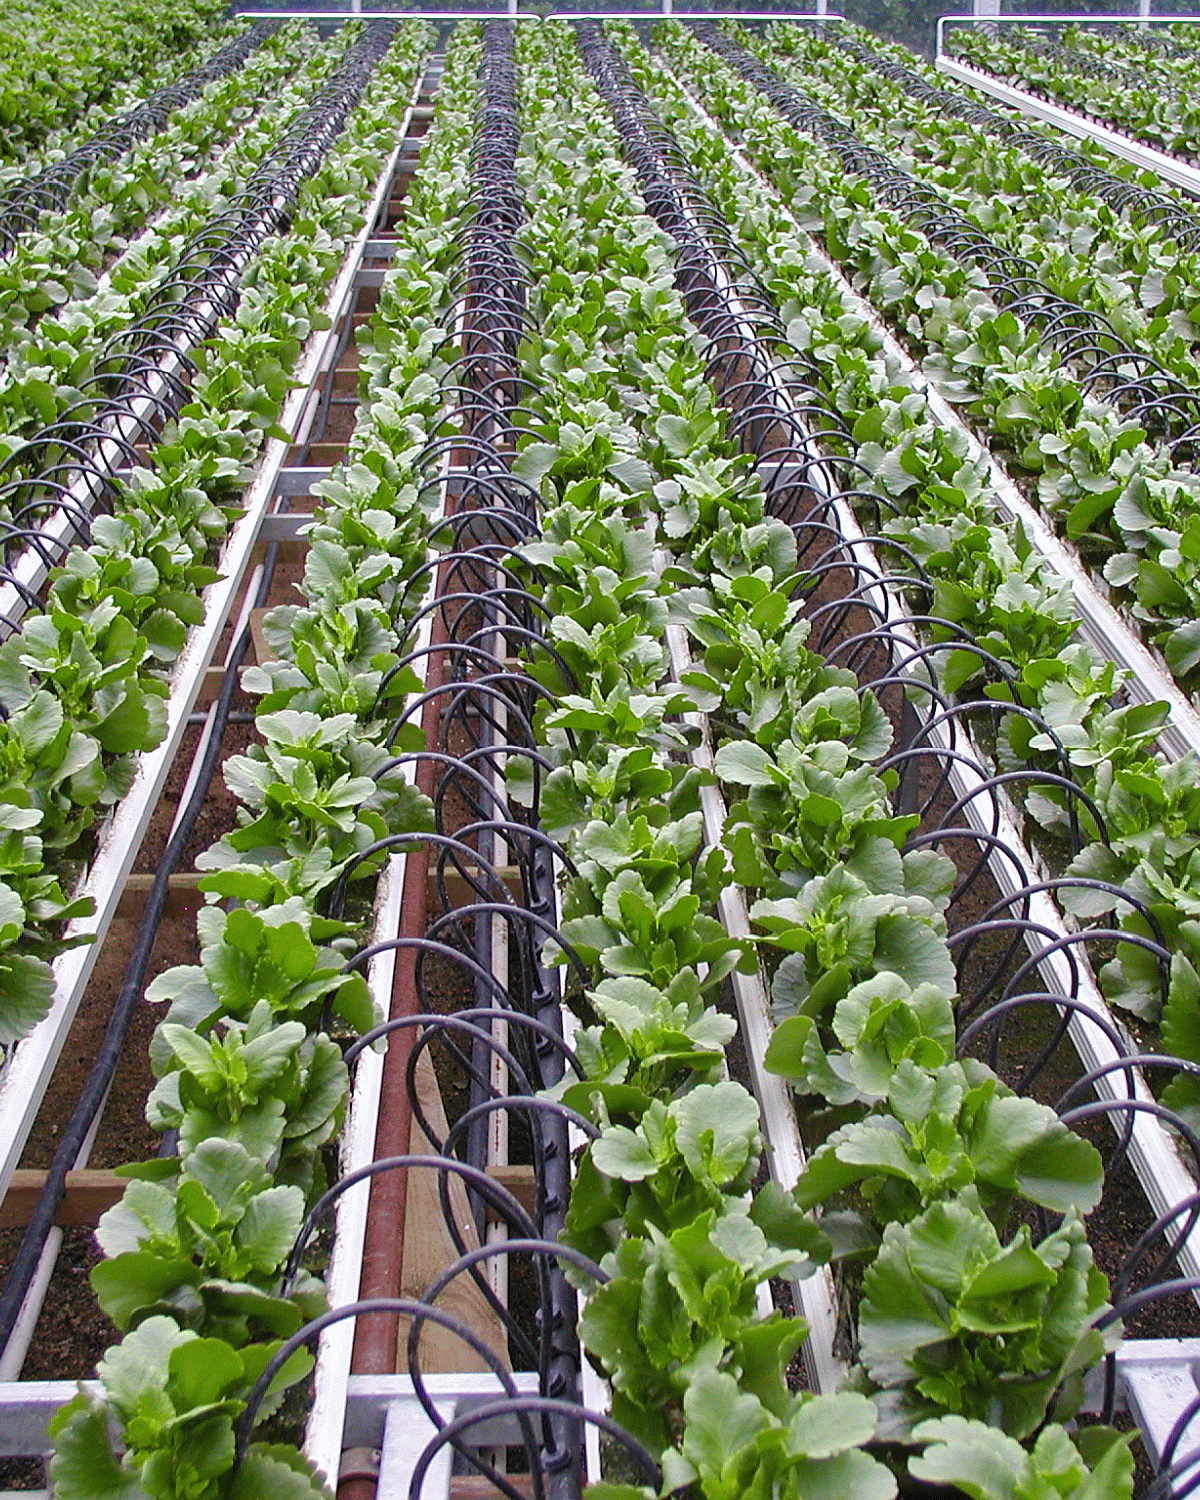 Irrigation hydroponics keep the water flowing salad